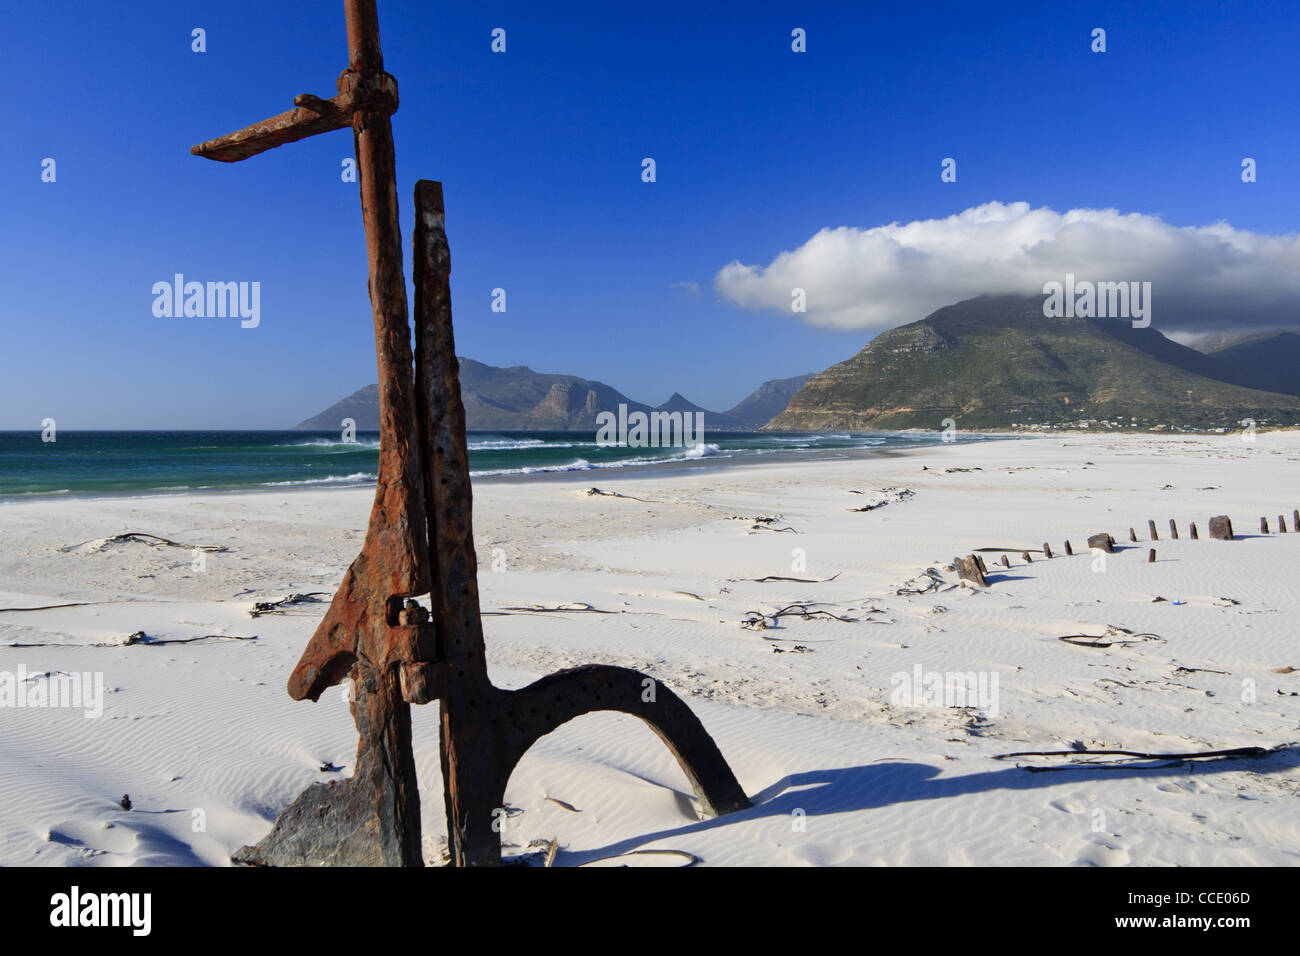 Shipwreck with rudder on the beach with a mountain backdrop Stock Photo